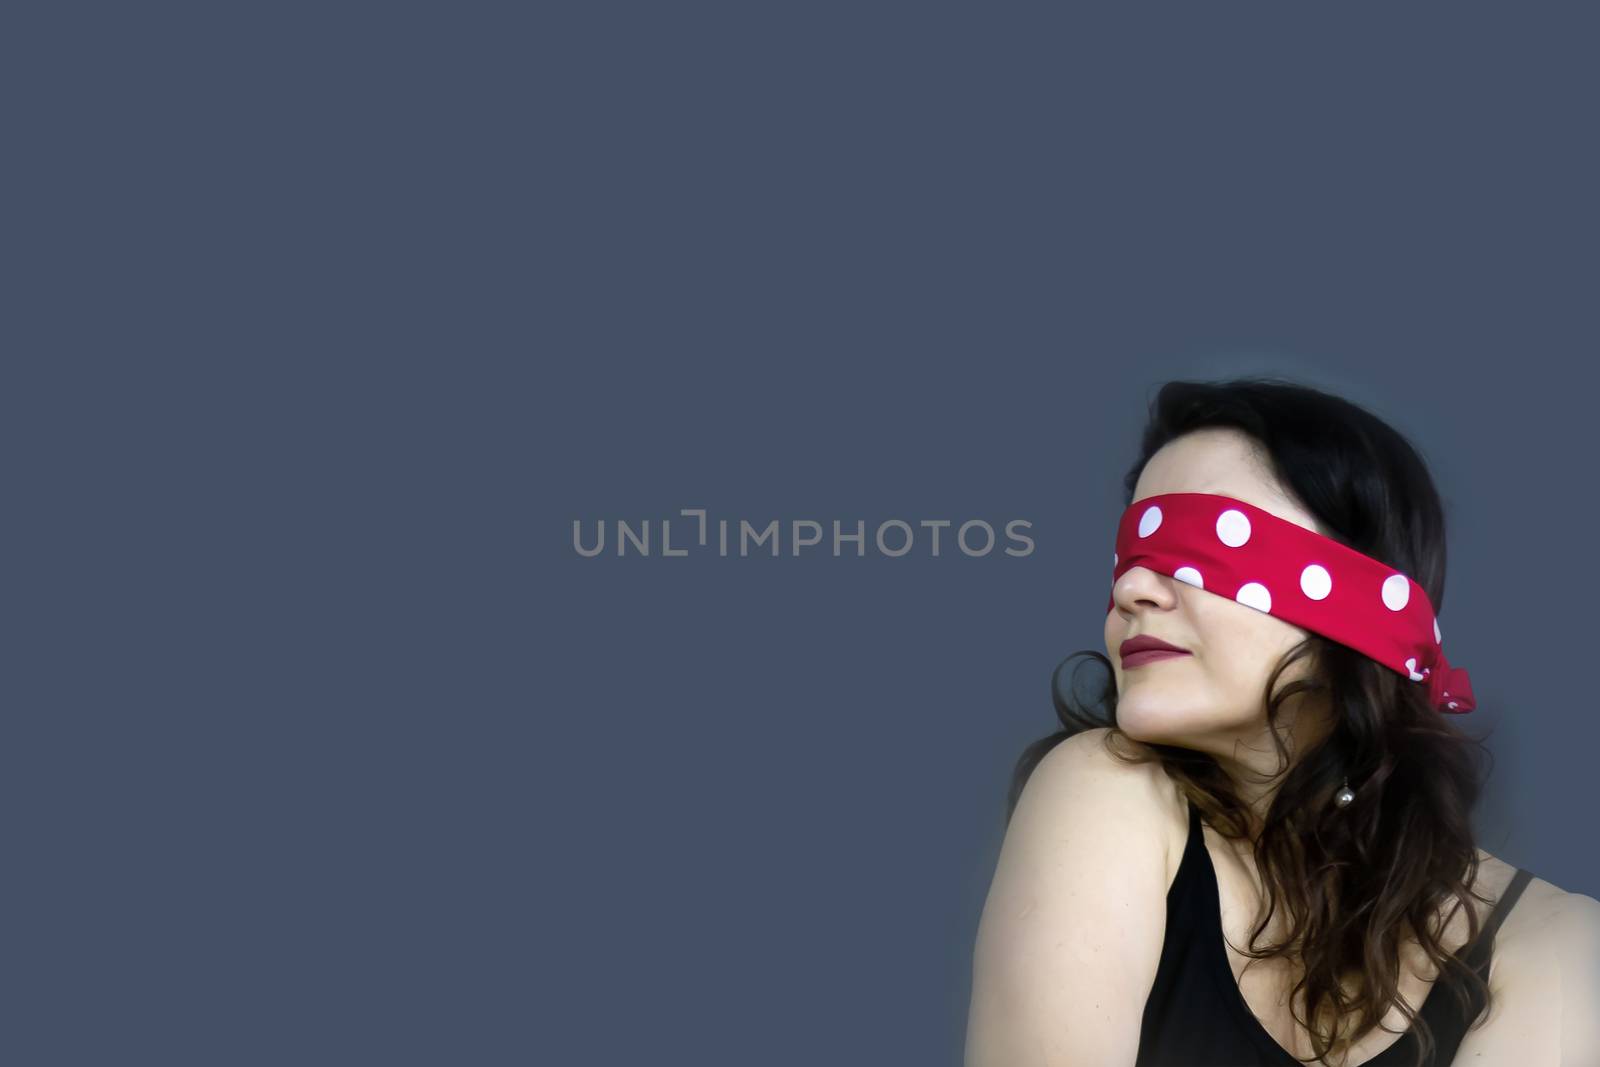 Portrait of a beautiful, fashionable middle-aged woman with long dark hair and a red blindfold covering her eyes, posing against a dark gray background. by bonilook